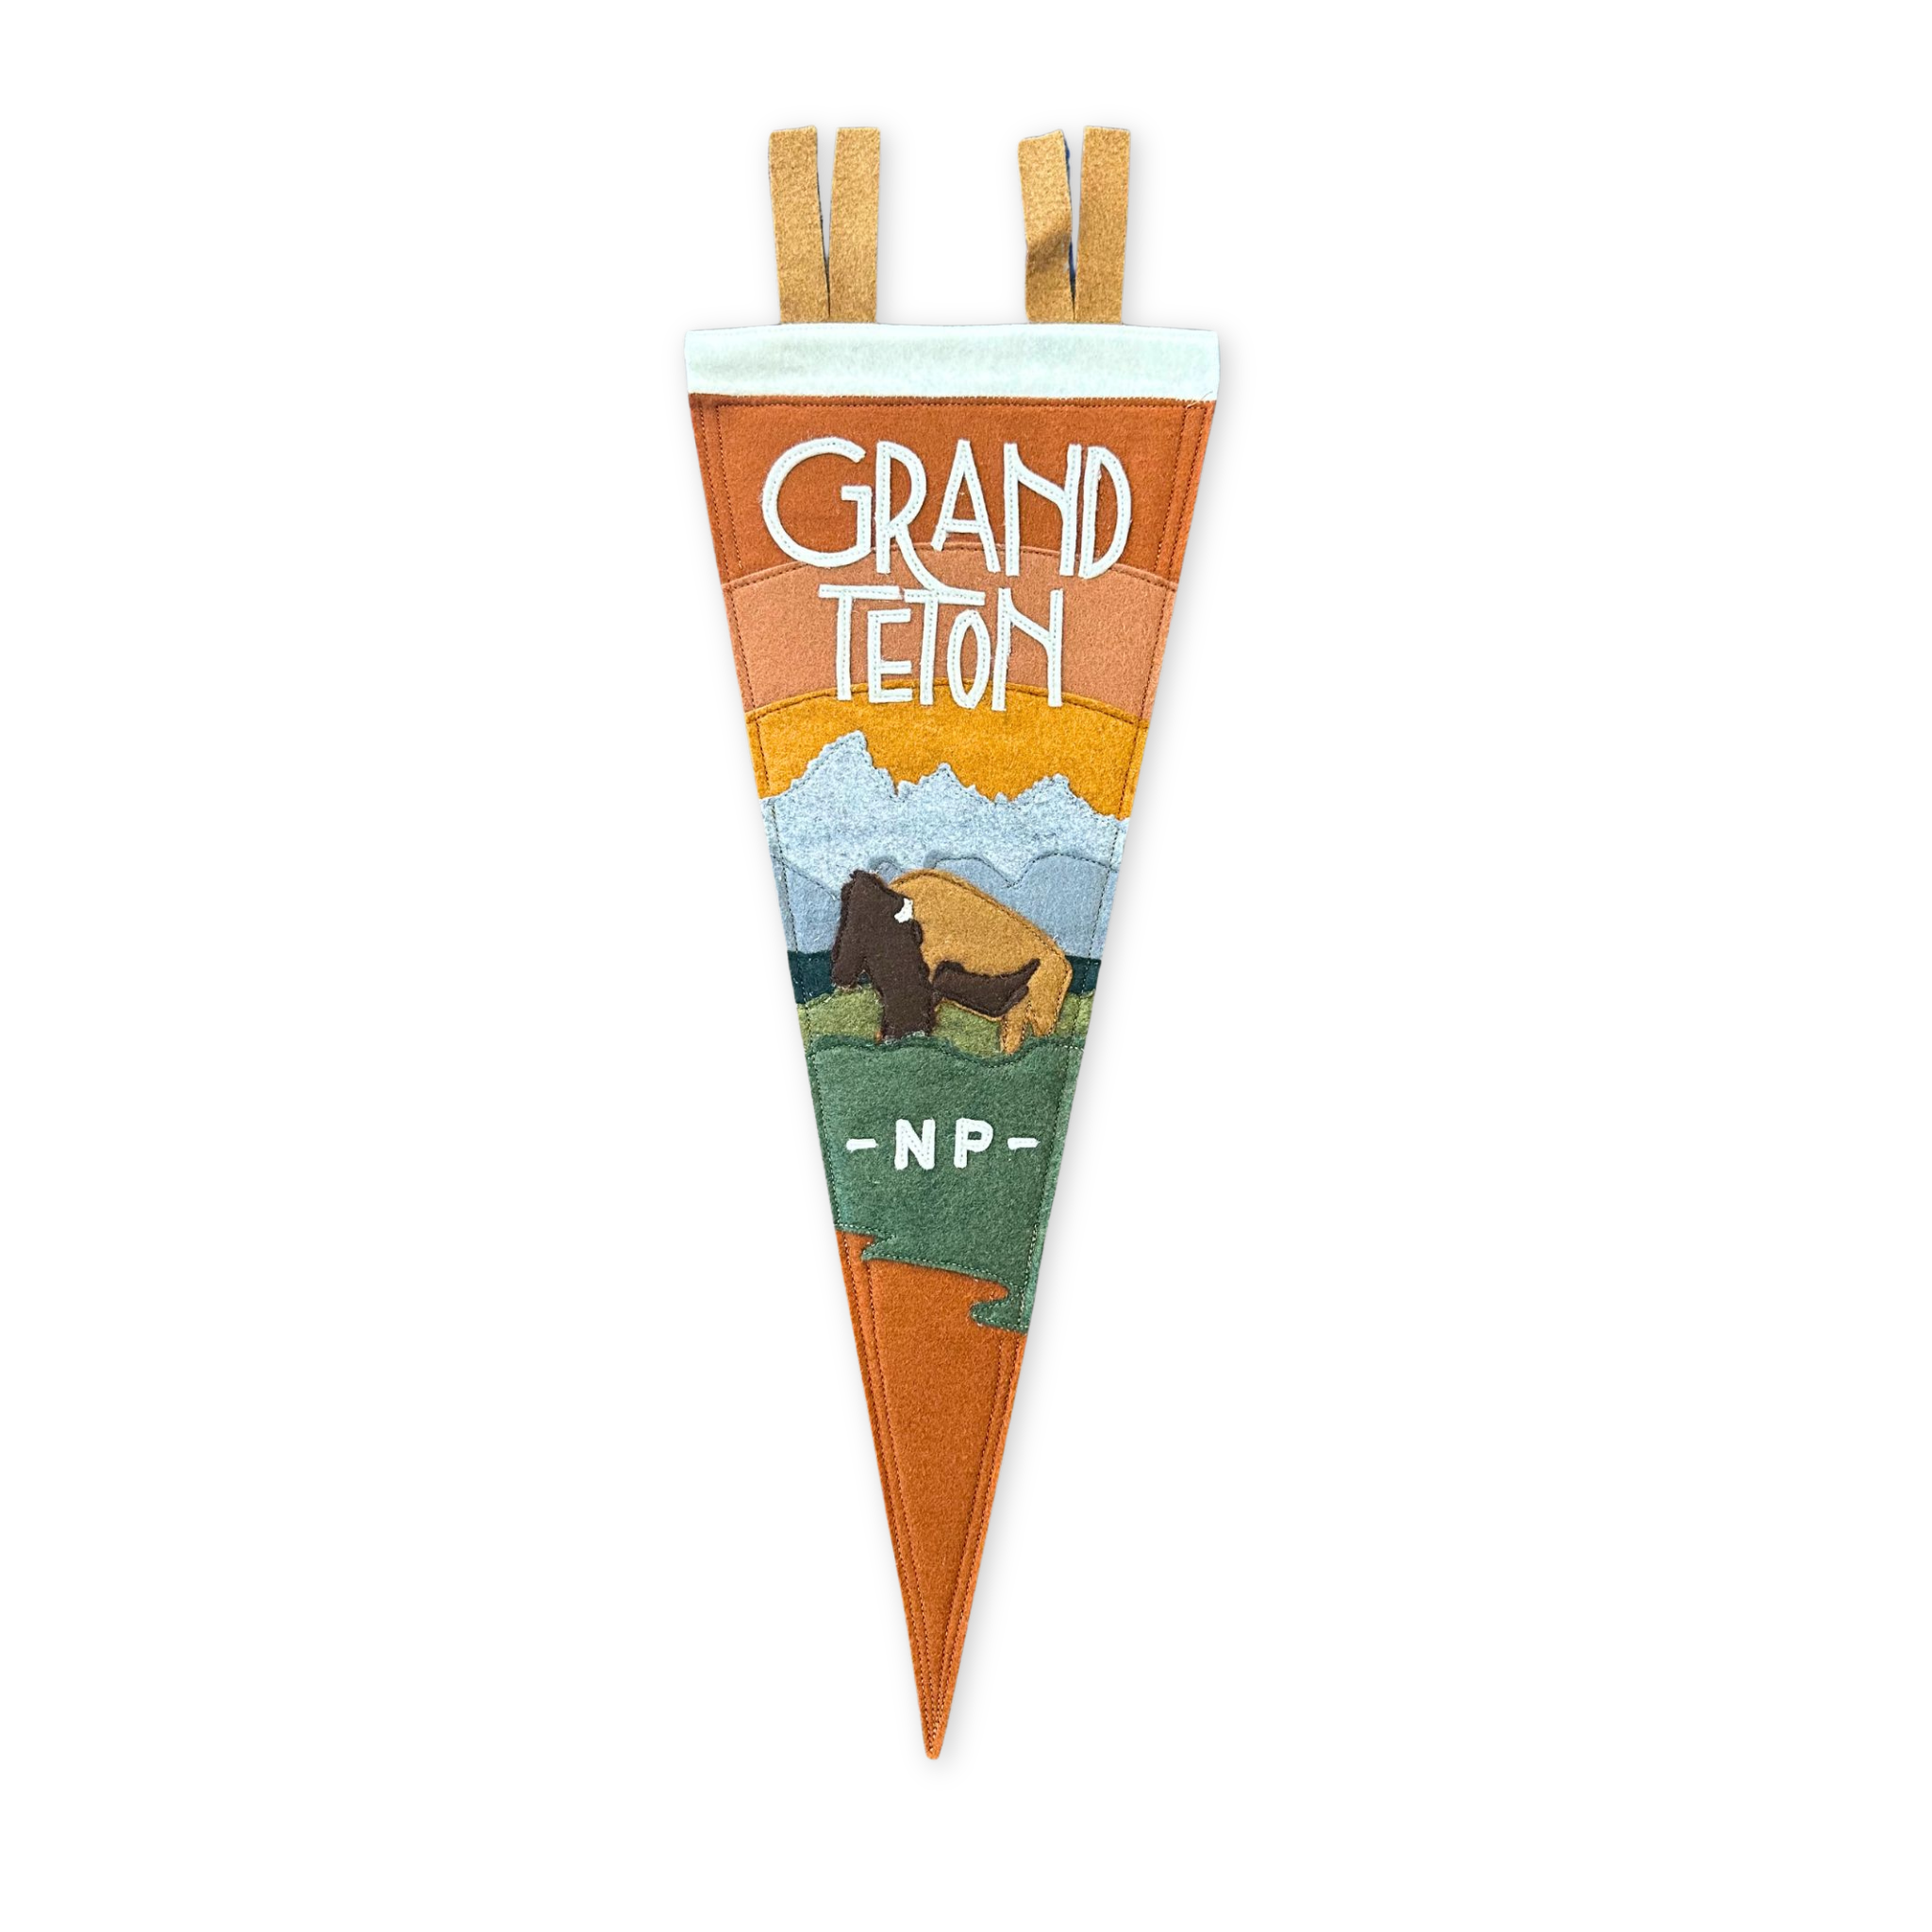 stitched felt pennant featuring the teton mountain range and a bison